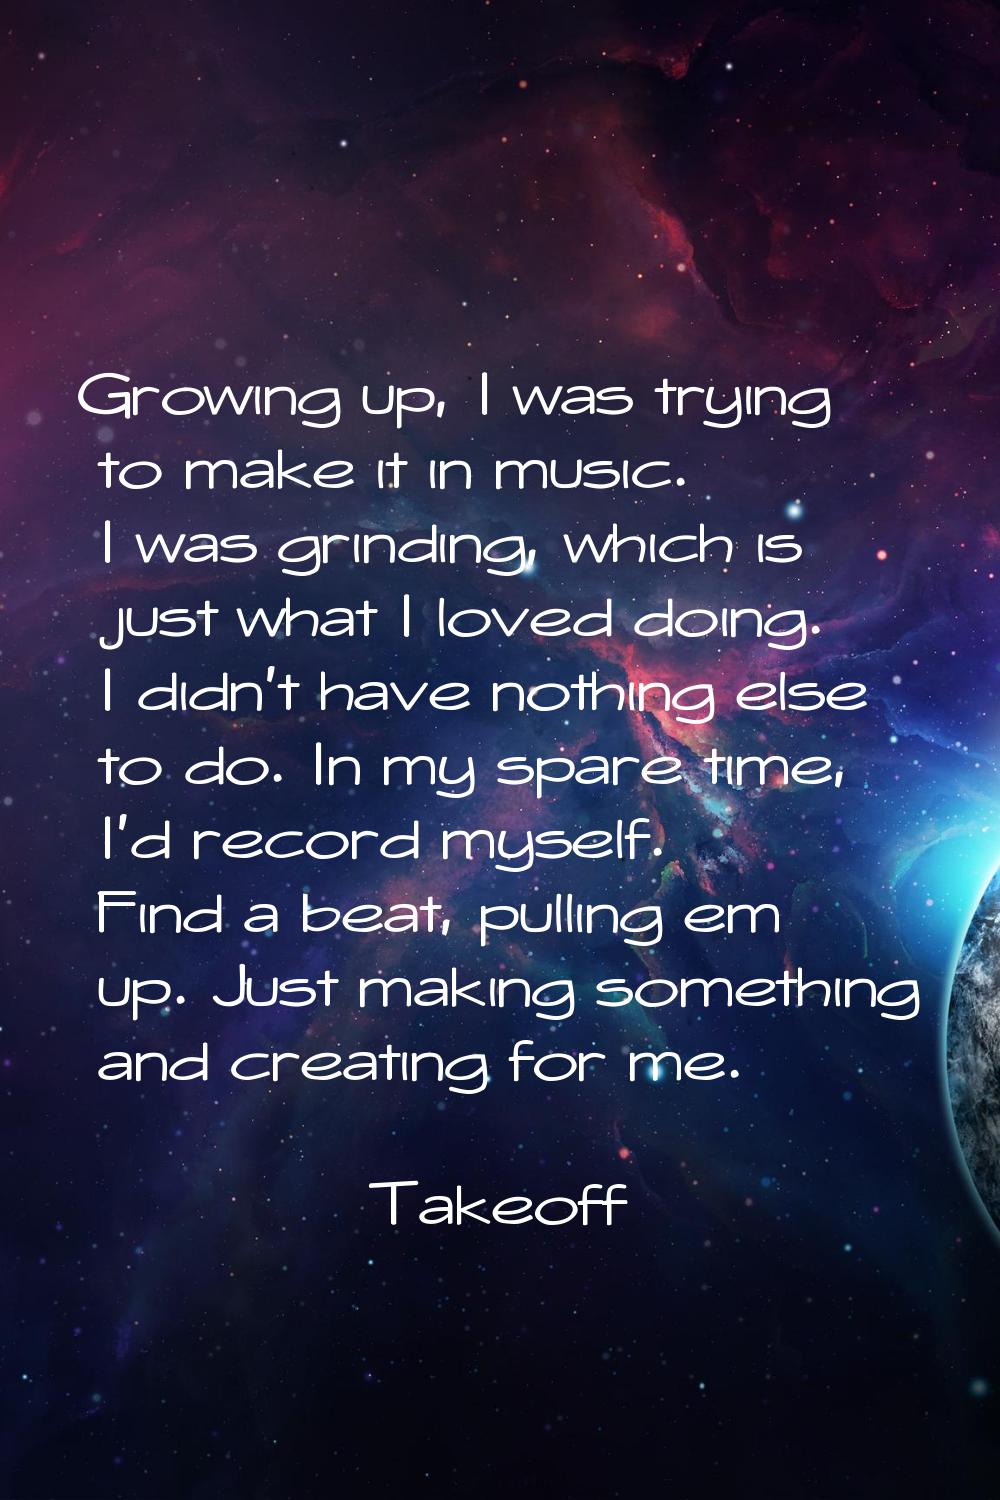 Growing up, I was trying to make it in music. I was grinding, which is just what I loved doing. I d